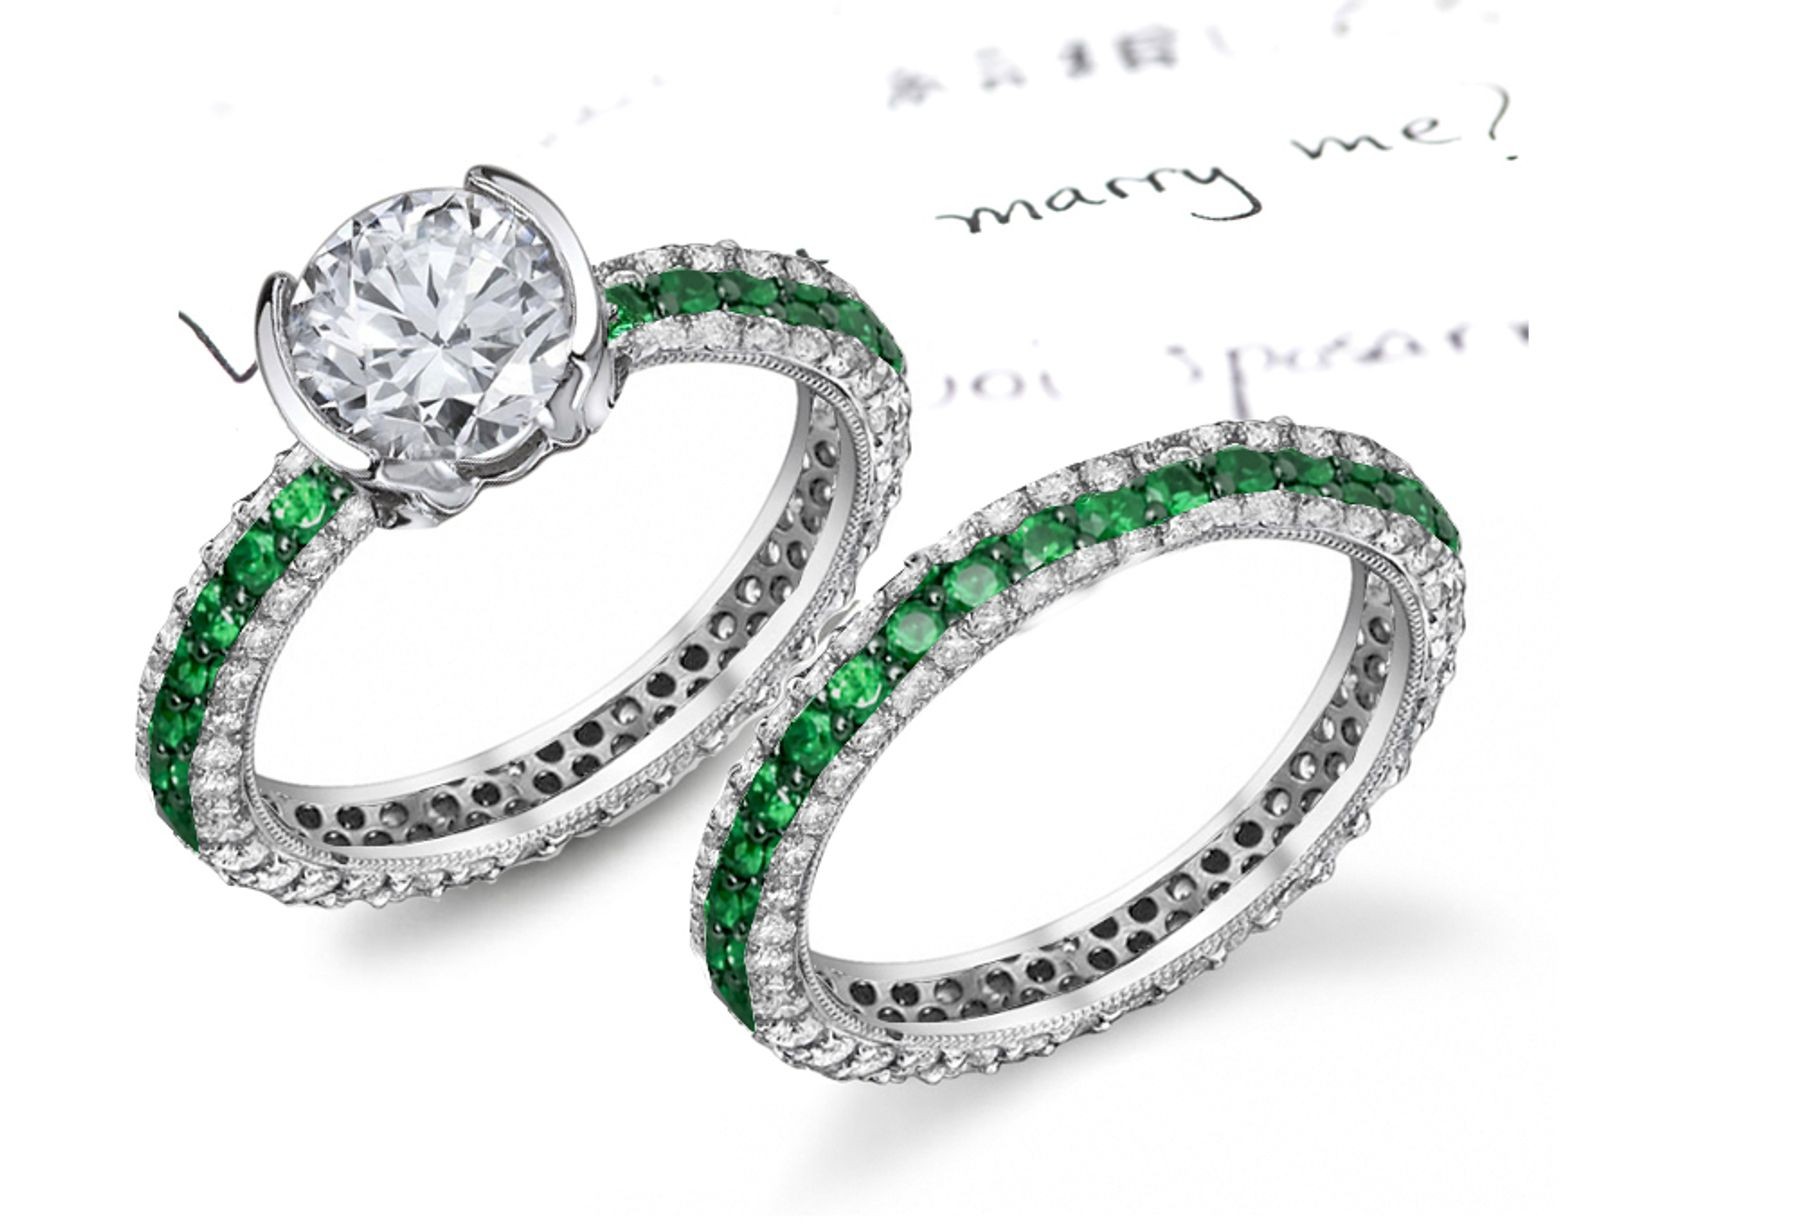 Bordered By Diamonds: French Art Deco Pave' Diamond Ring With Emerald in 14k White Gold